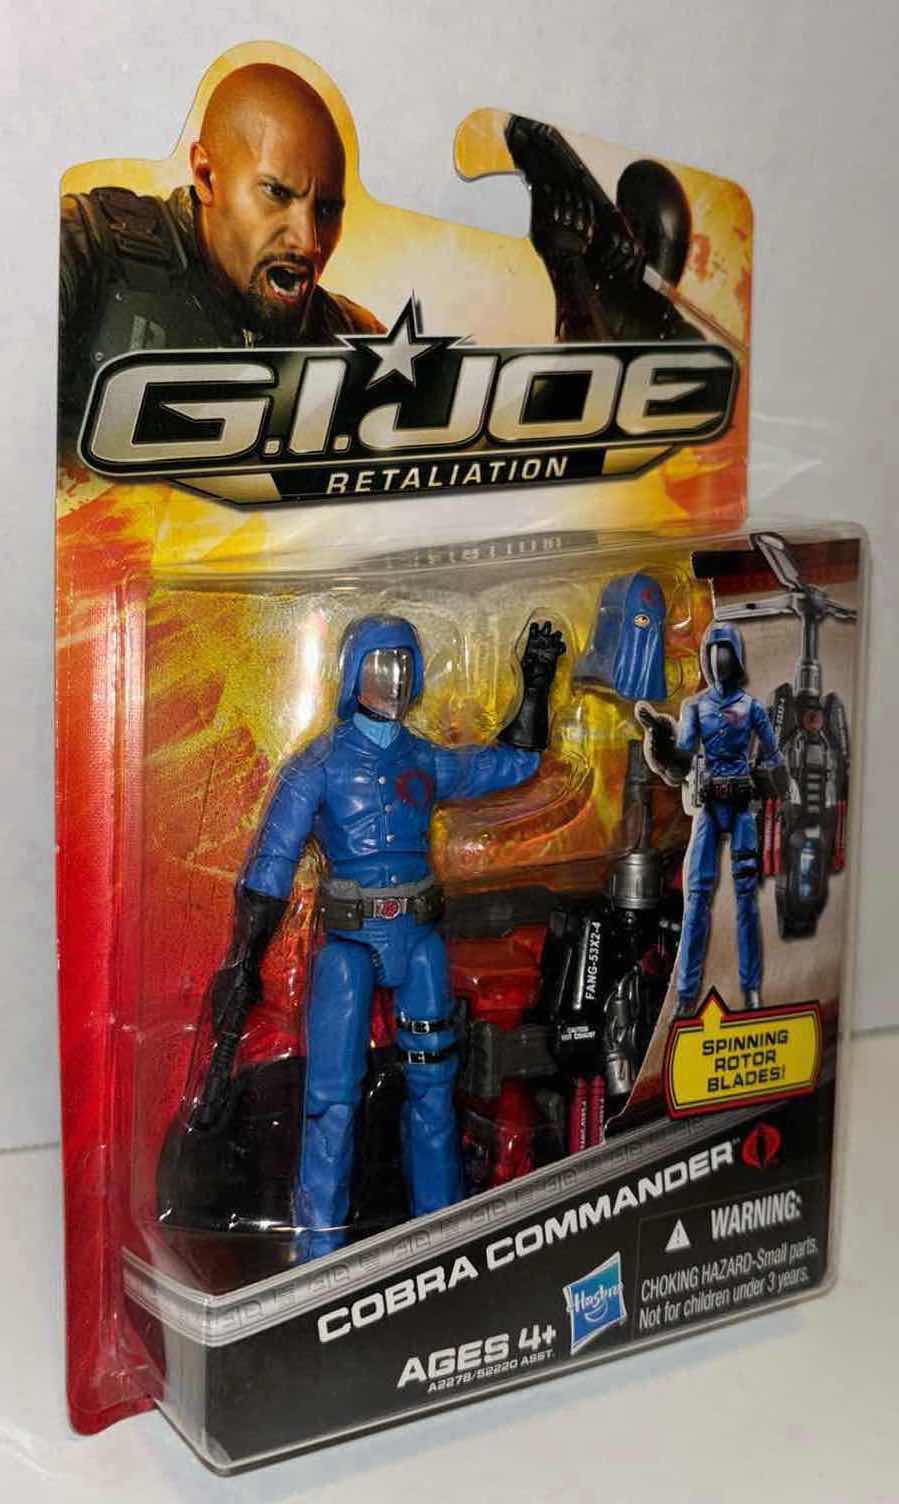 Photo 2 of NEW HASBRO G.I. JOE RETALIATION ACTION FIGURE & ACCESSORIES “COBRA COMMANDER” IN PROTECTIVE CLEAR CLAMSHELL CASE